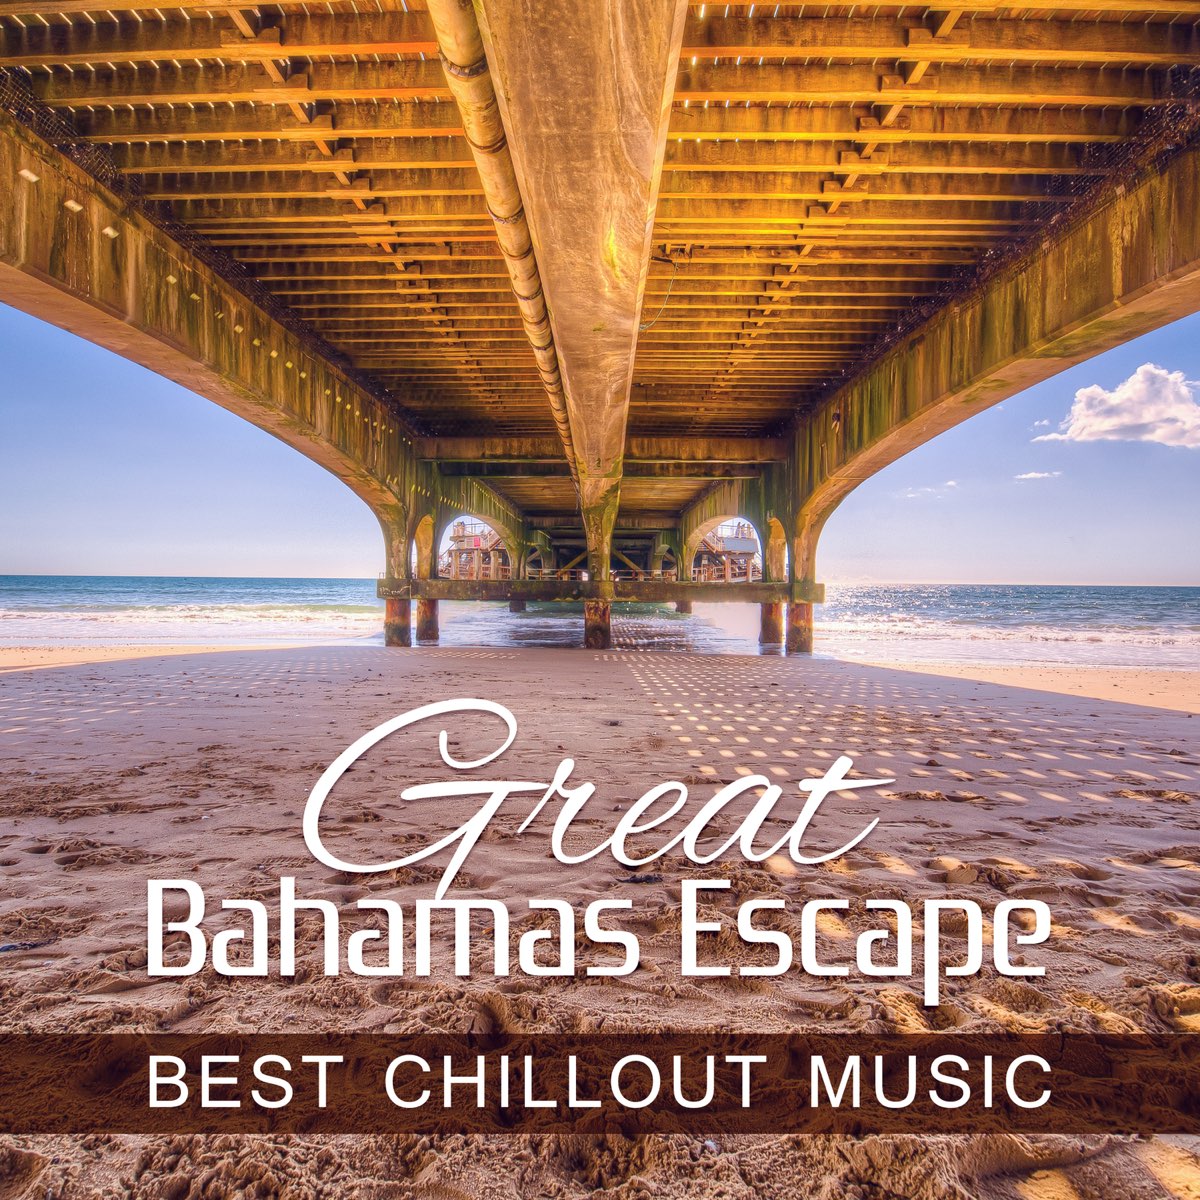 Great Bahamas Escape: Best Chillout Music, Exotic Journey, Night Party  Time, Electronic Music Lounge, Mystical Sunset, Relax on the Beach by Chillout  Music Ensemble on Apple Music